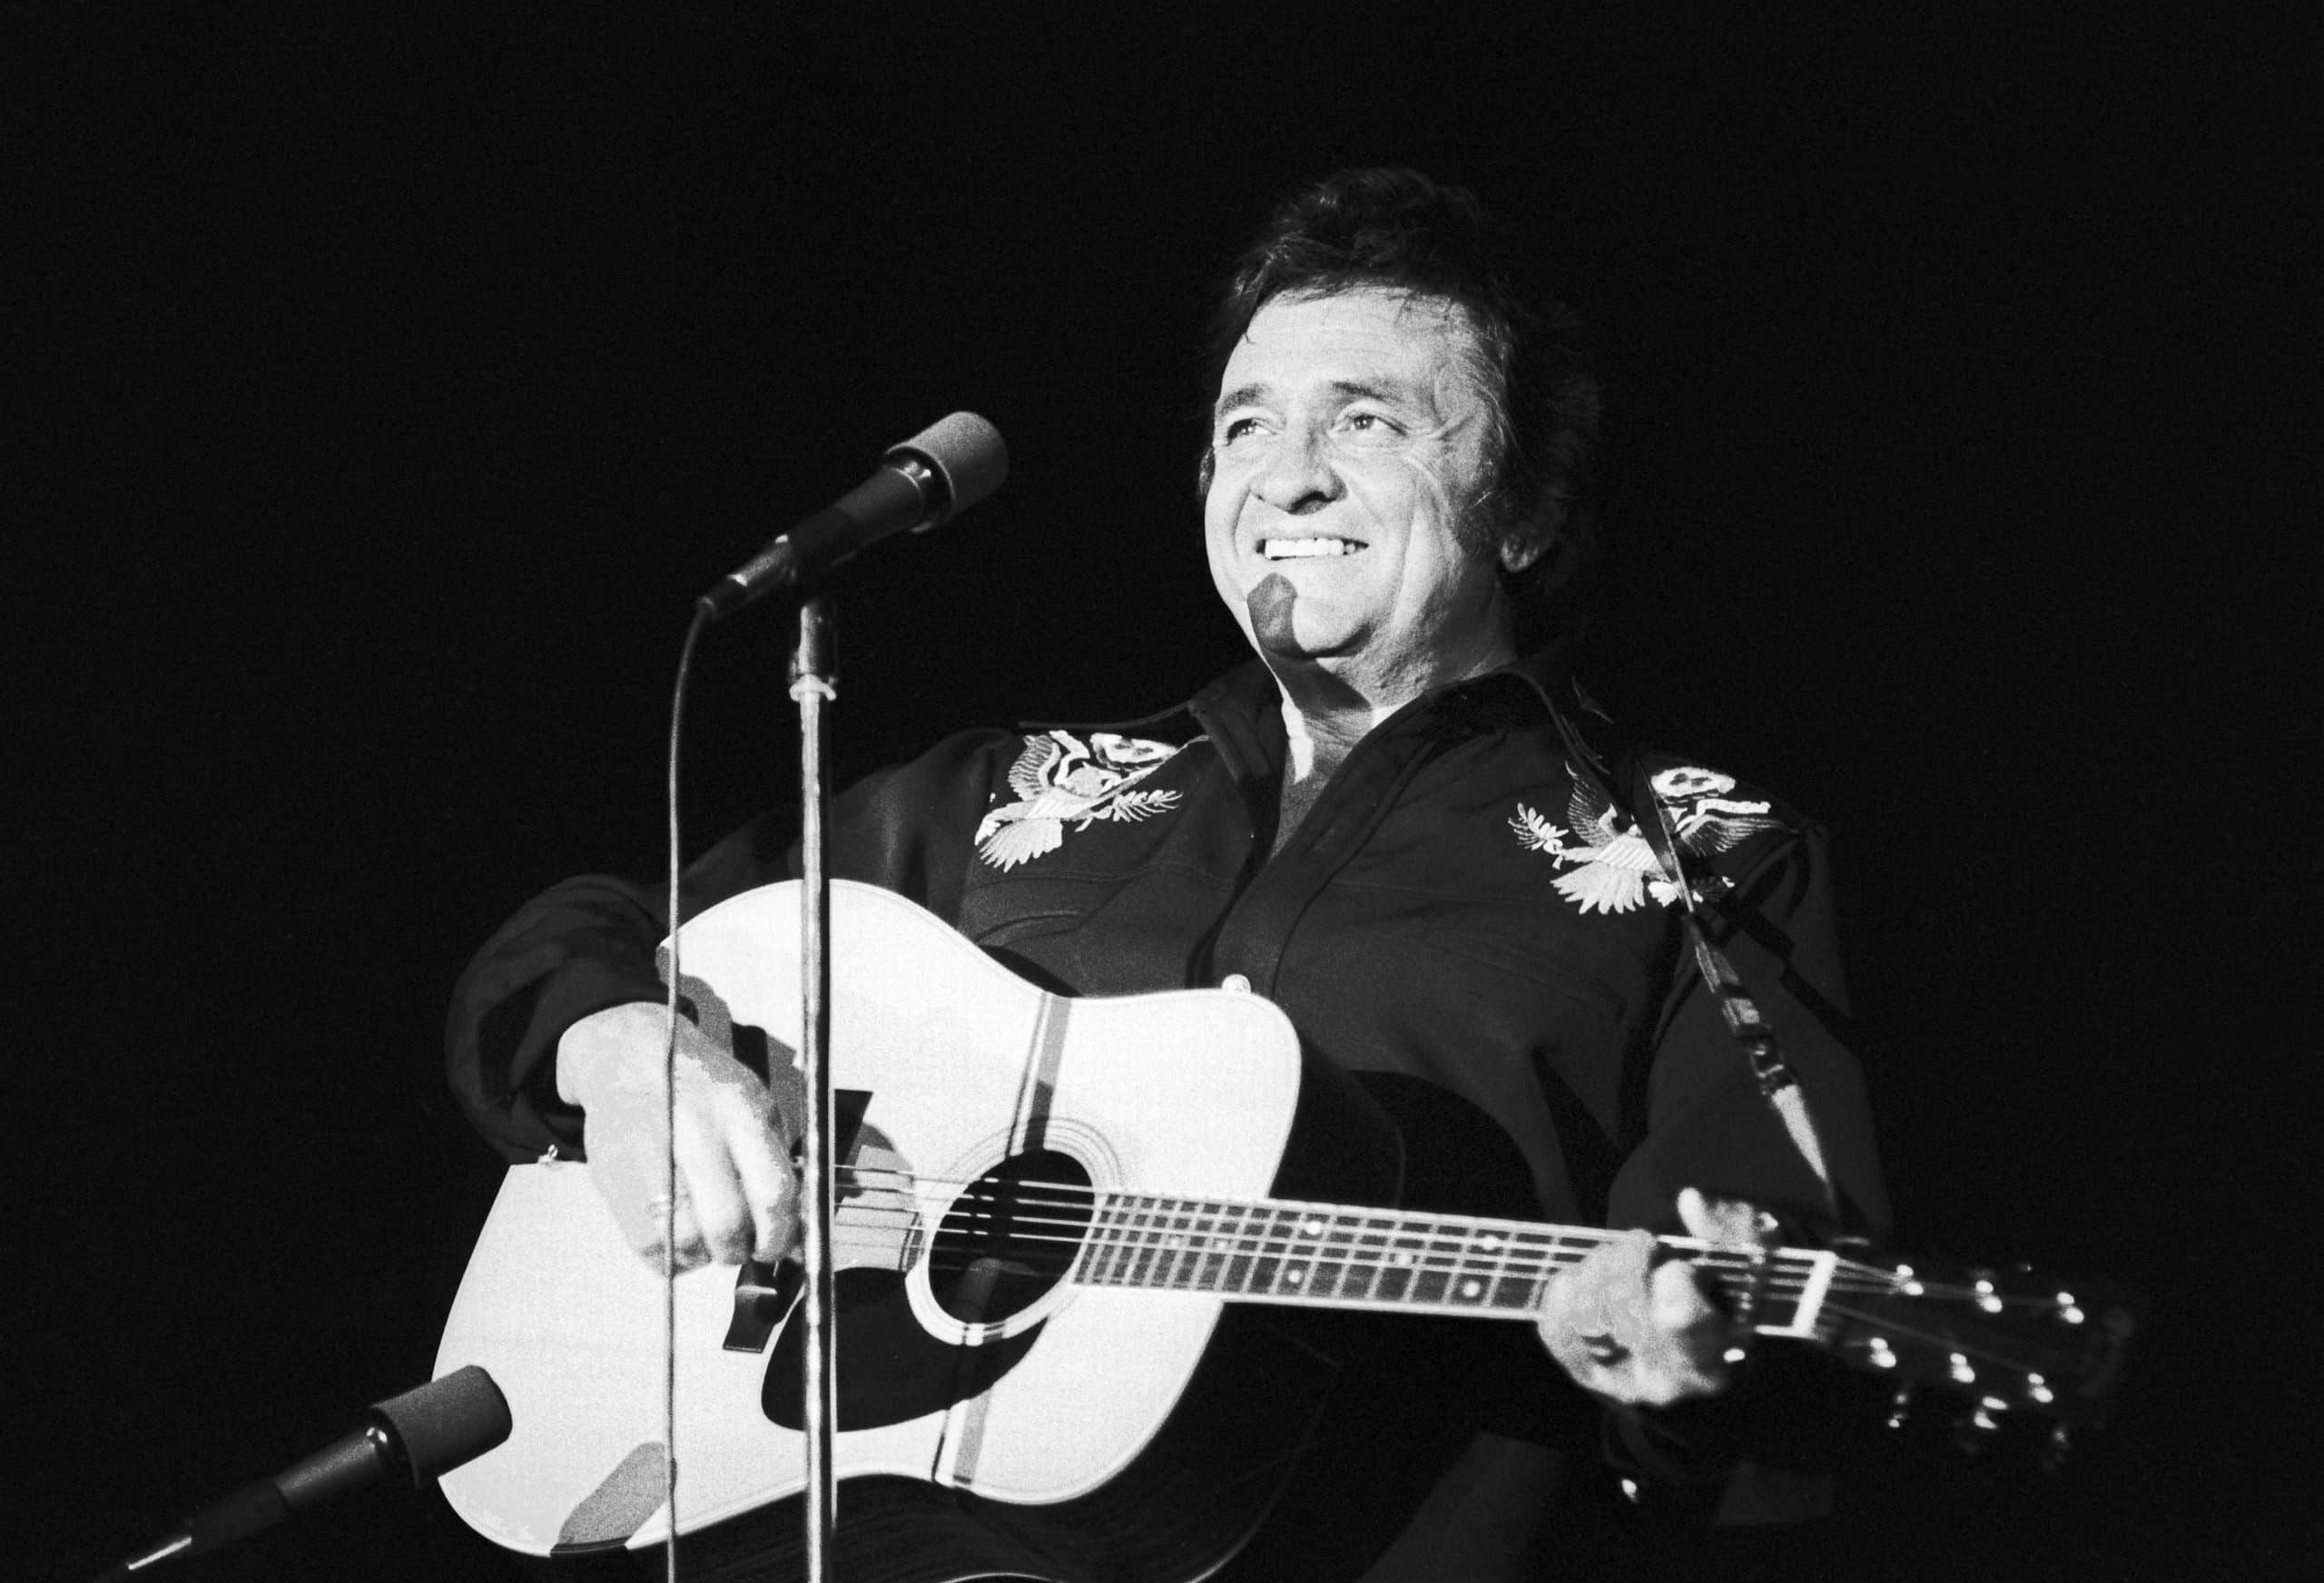 Johnny Cash is a country artist in the Rock & Roll Hall of Fame